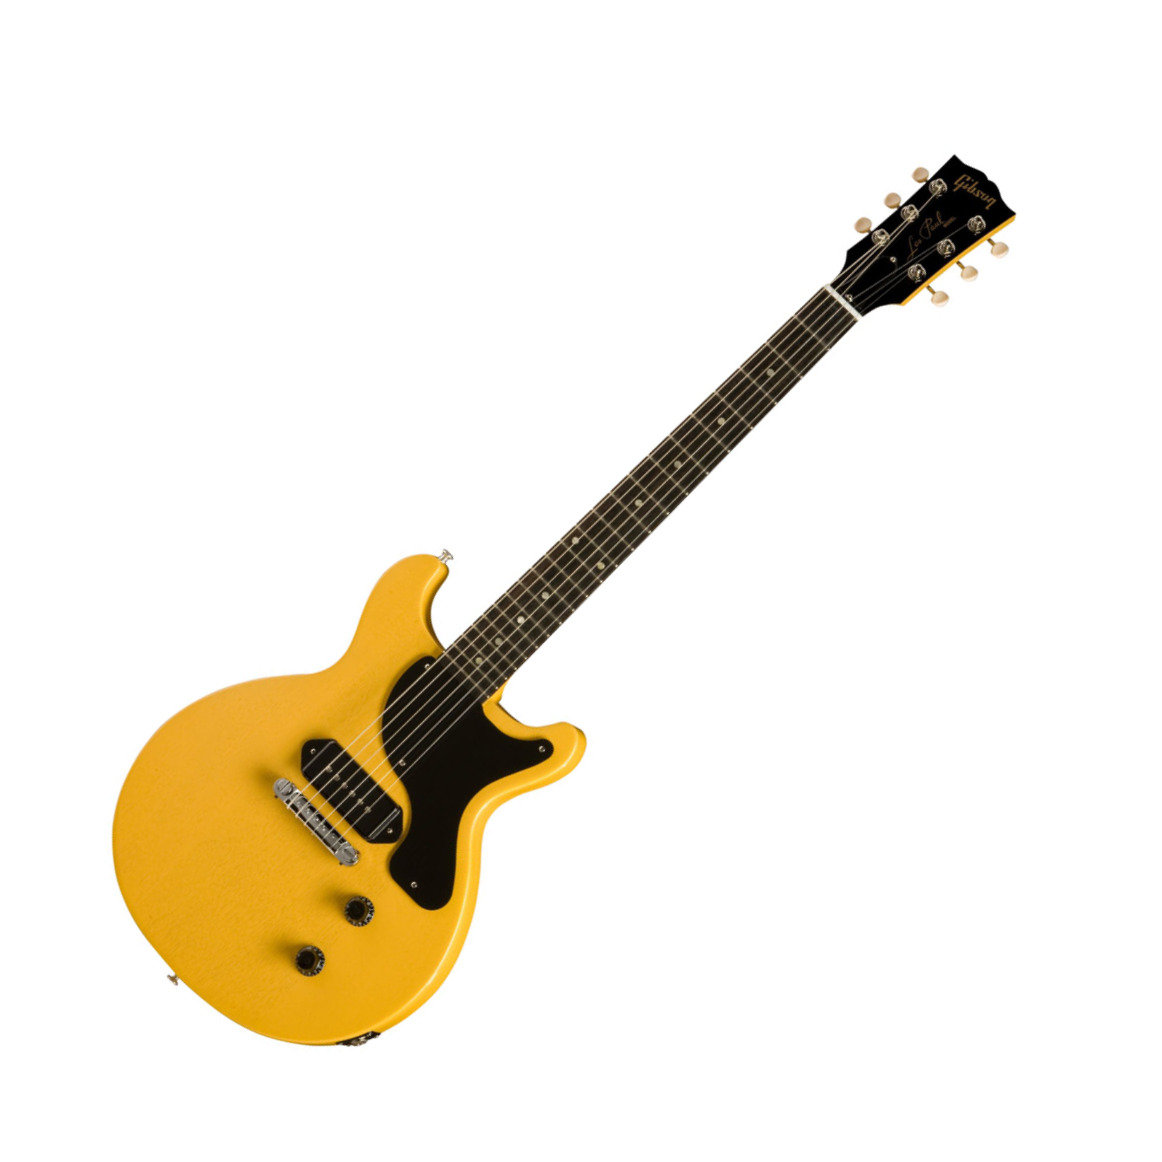 Gibson Les Paul Junior Double Cutaway Electric Guitar at zZounds